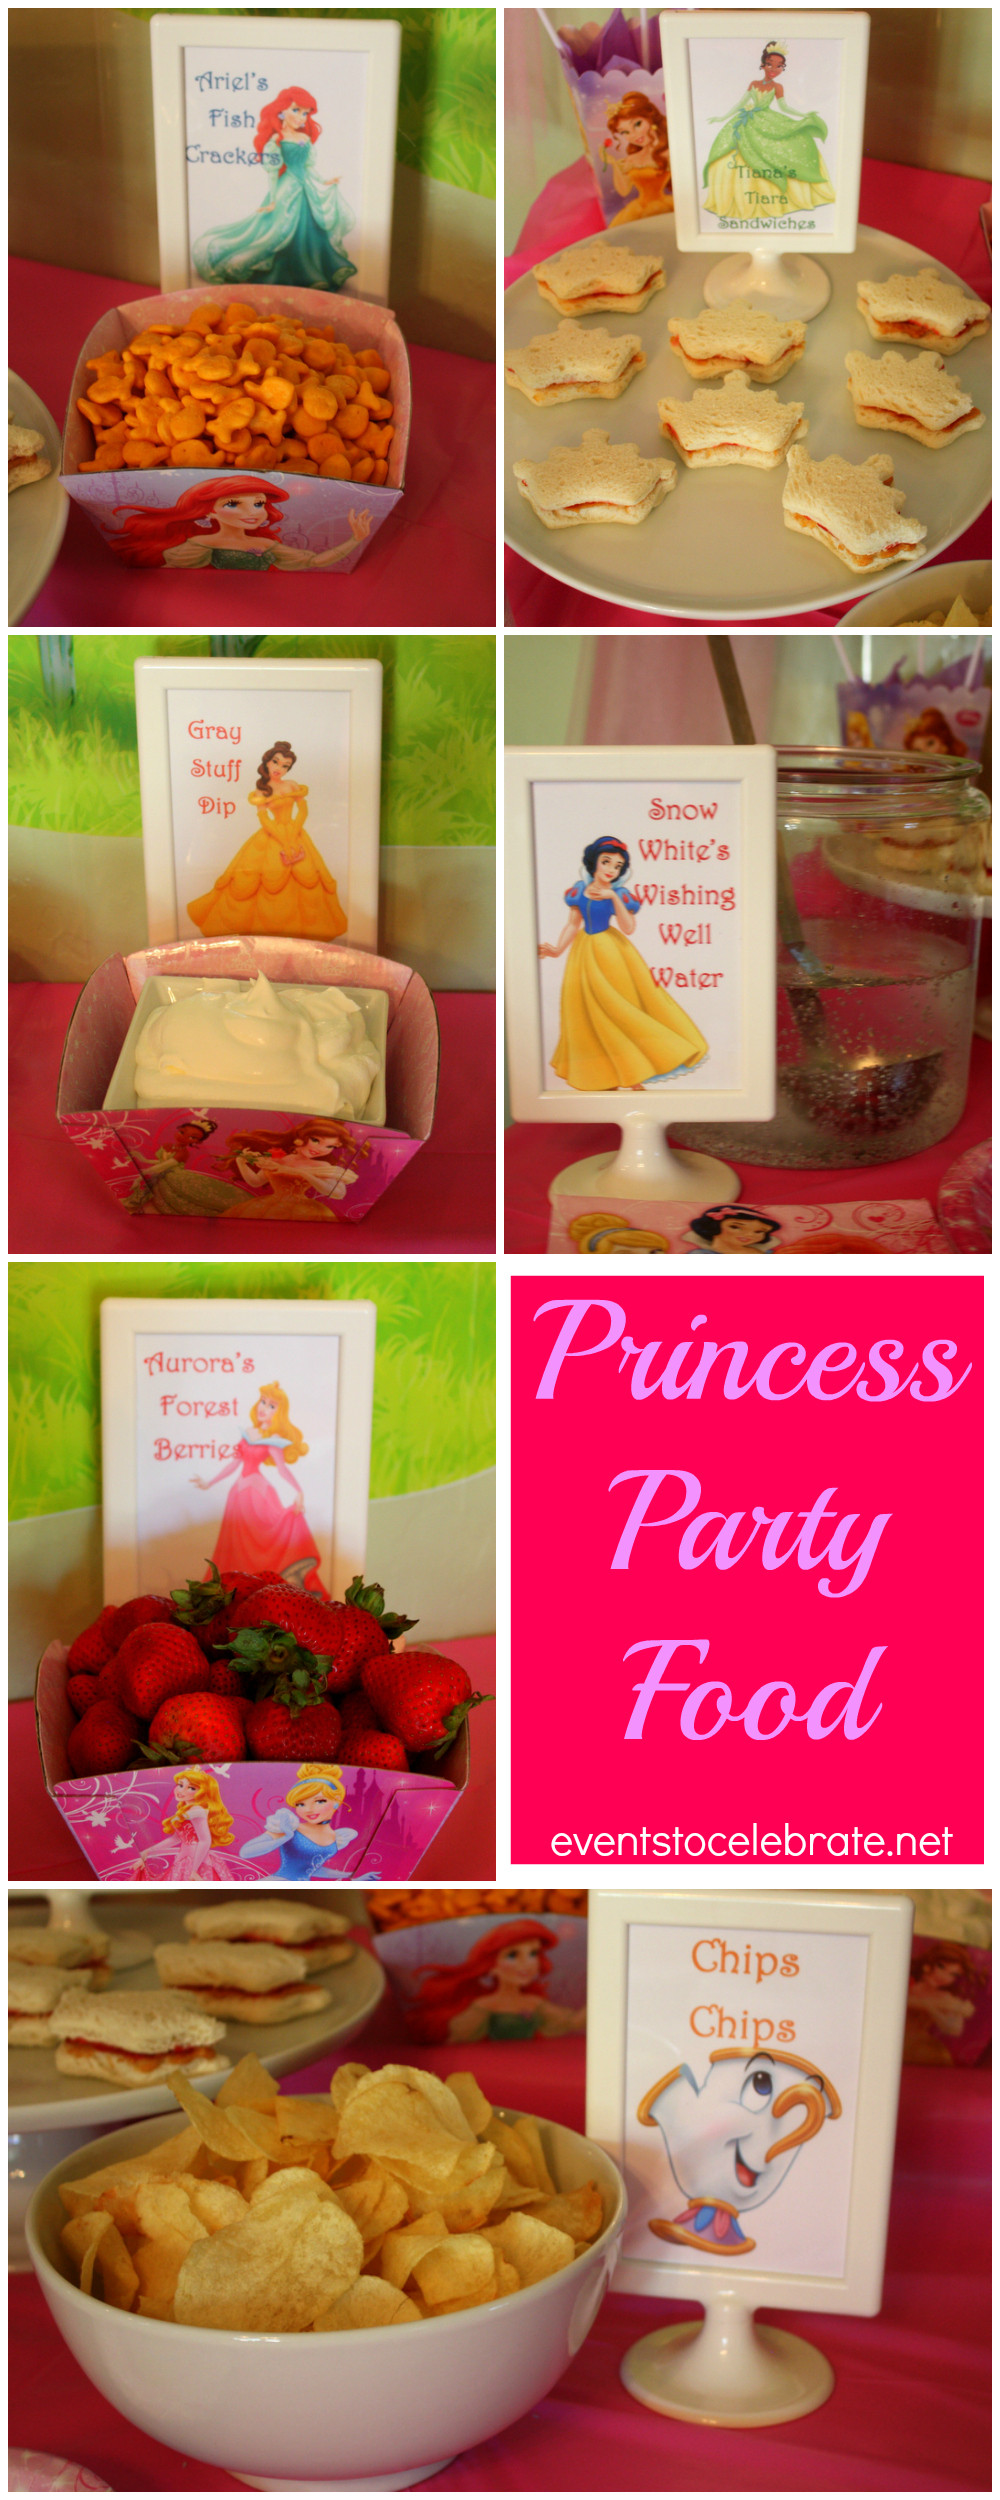 Childrens Princess Party Food Ideas
 Kids Birthday Parties Archives Page 2 of 7 events to